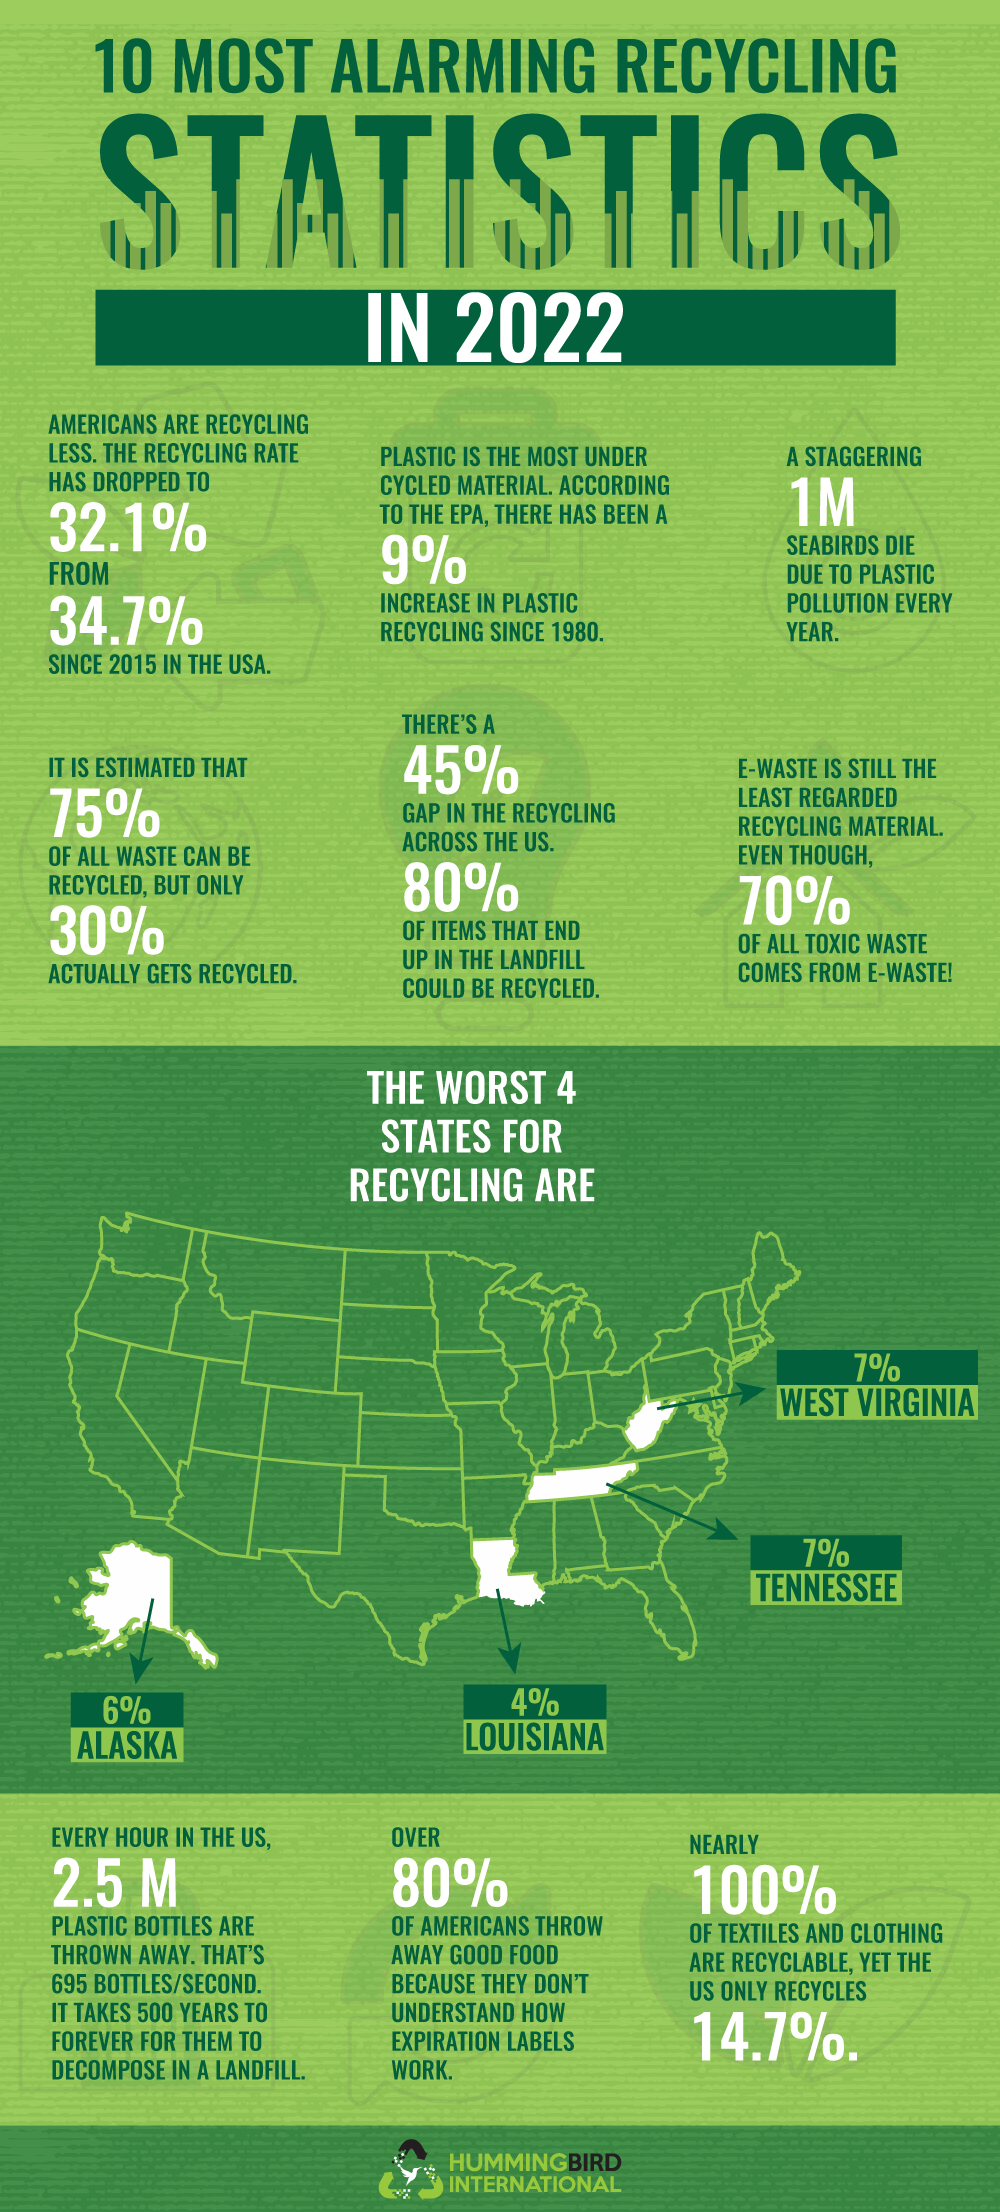 [INFOGRAPHIC] 10 Recycling Statistics To Remember in 2022